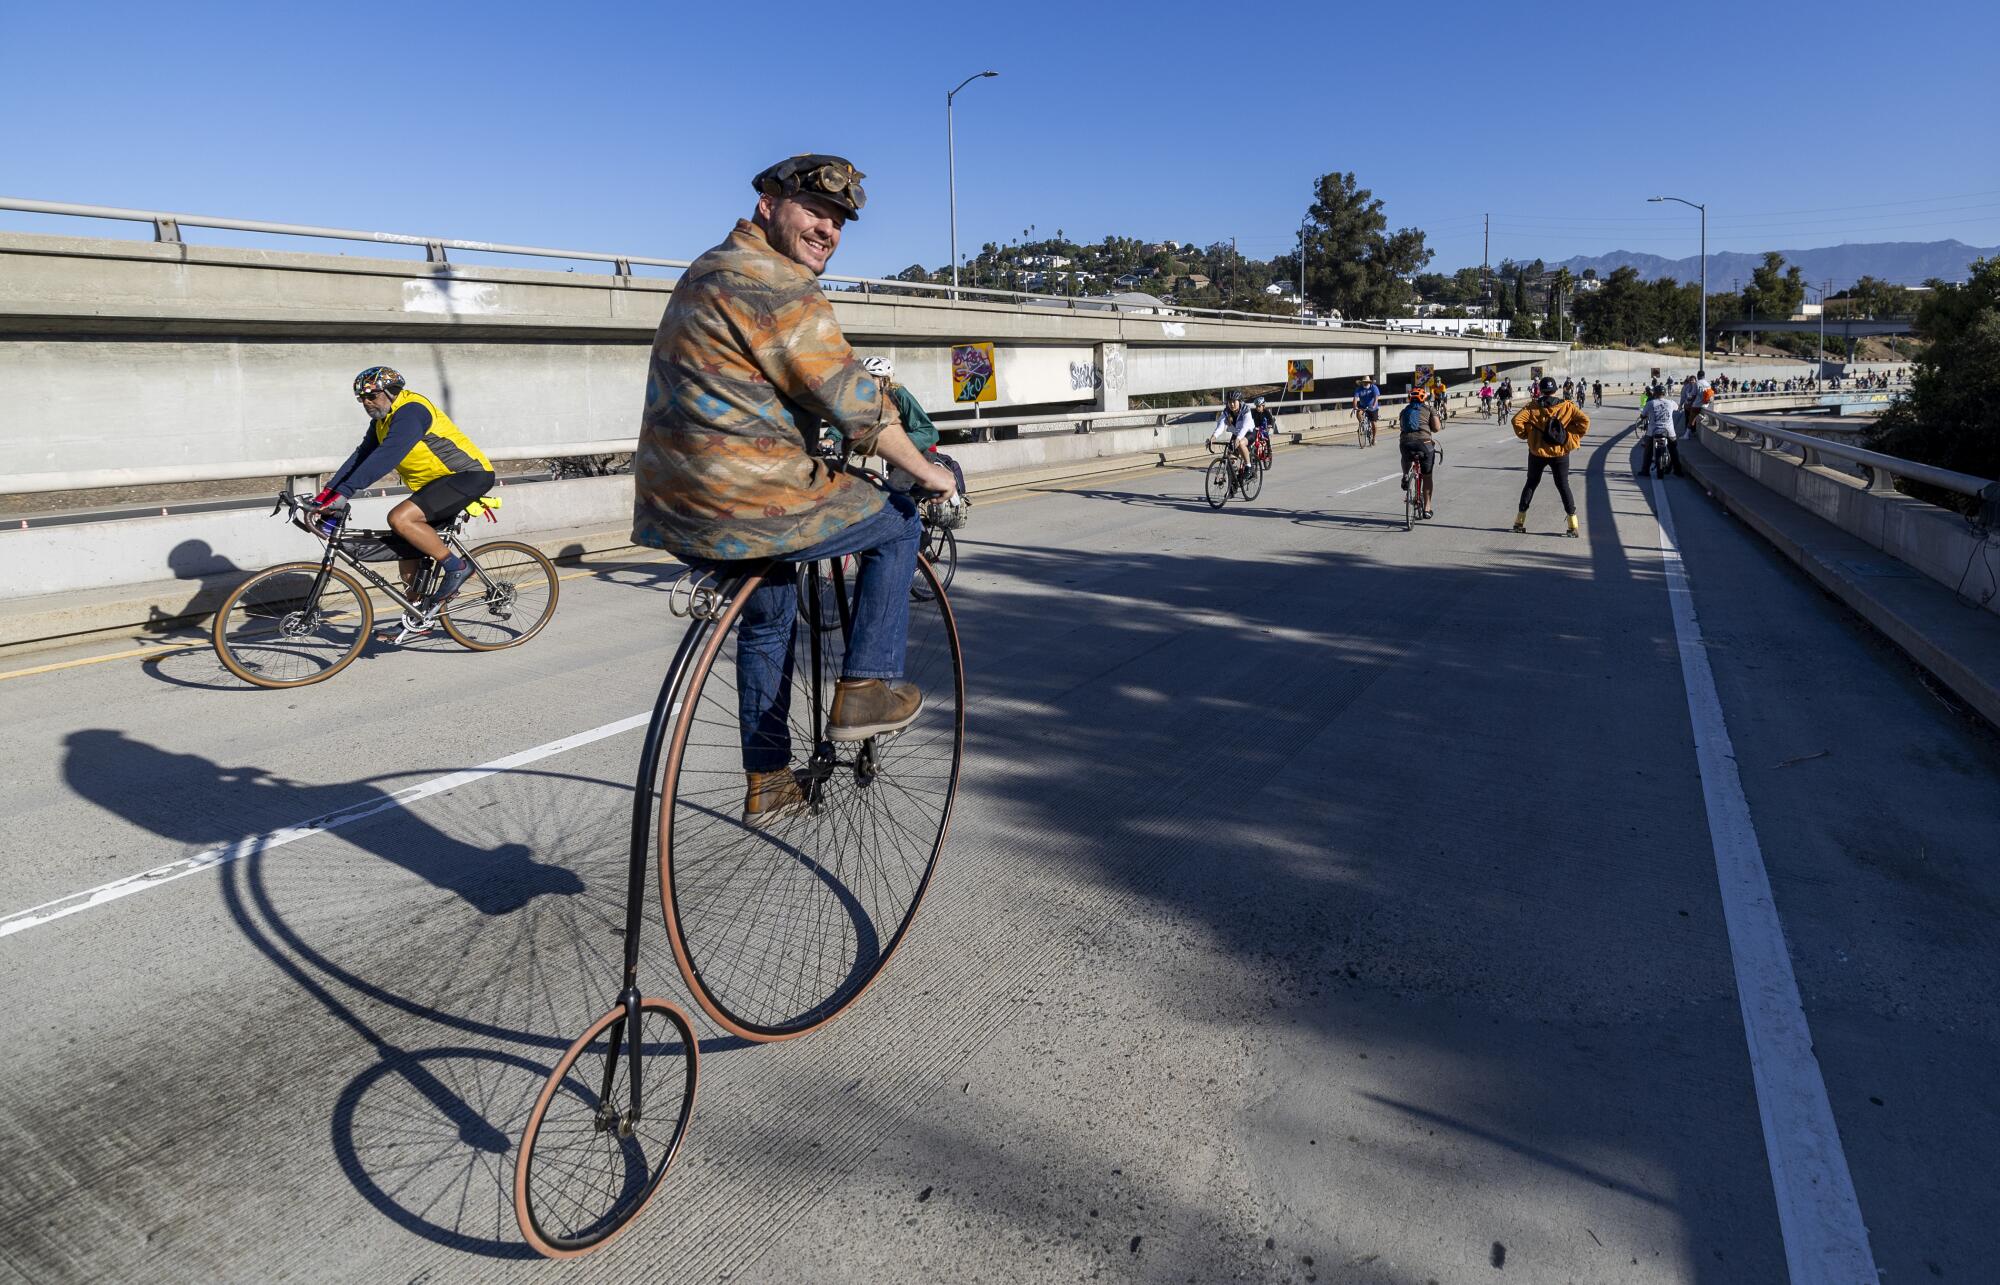 Alex Trepanier, 35, rides his pennyfarthing, the same bike he rode 20 years ago at ArroyoFest when he was a teenager.